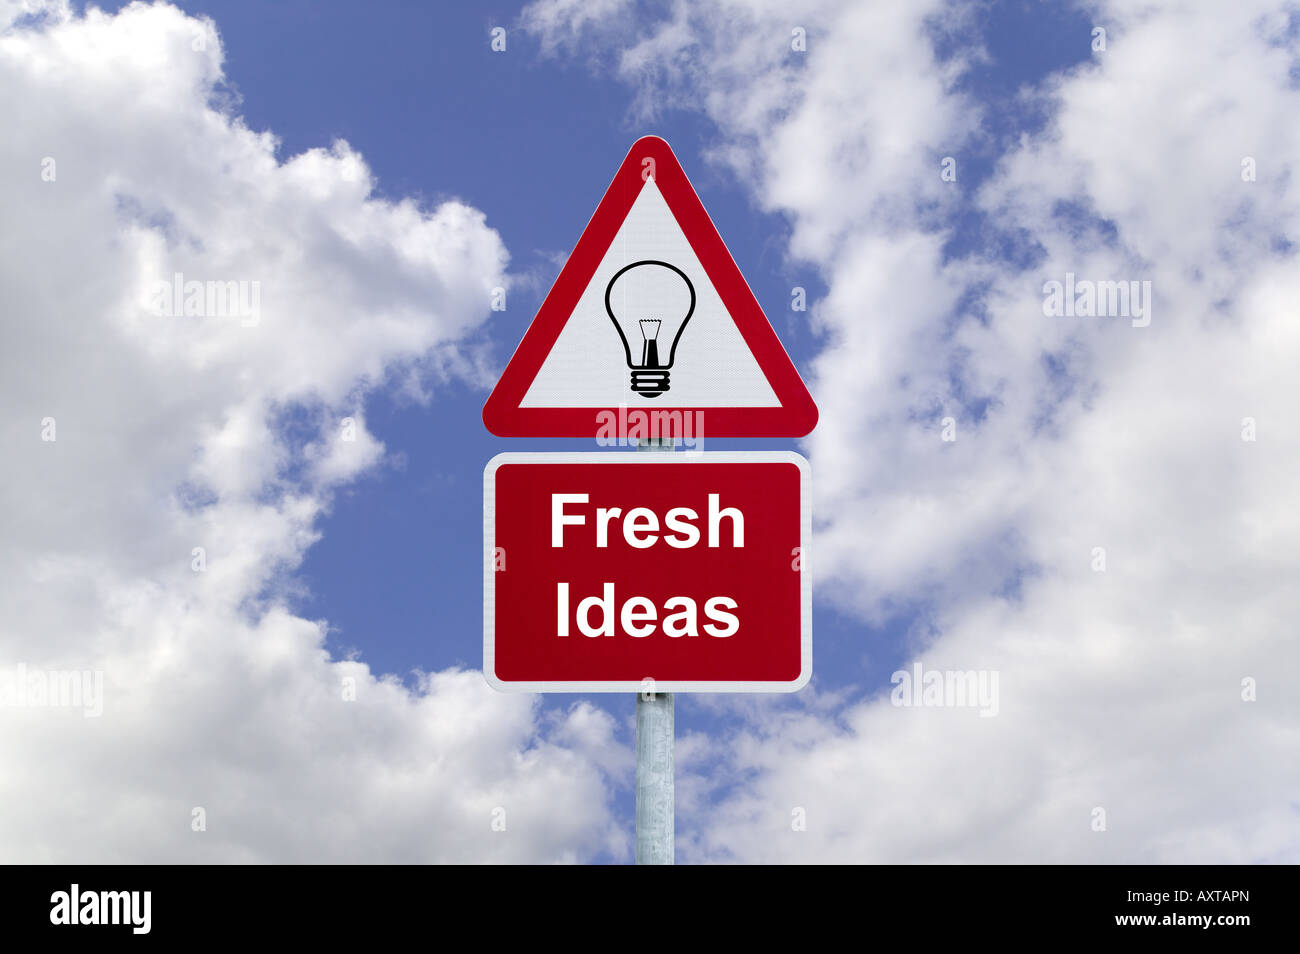 Signpost for Fresh Ideas against a blue cloudy sky business concept image Stock Photo